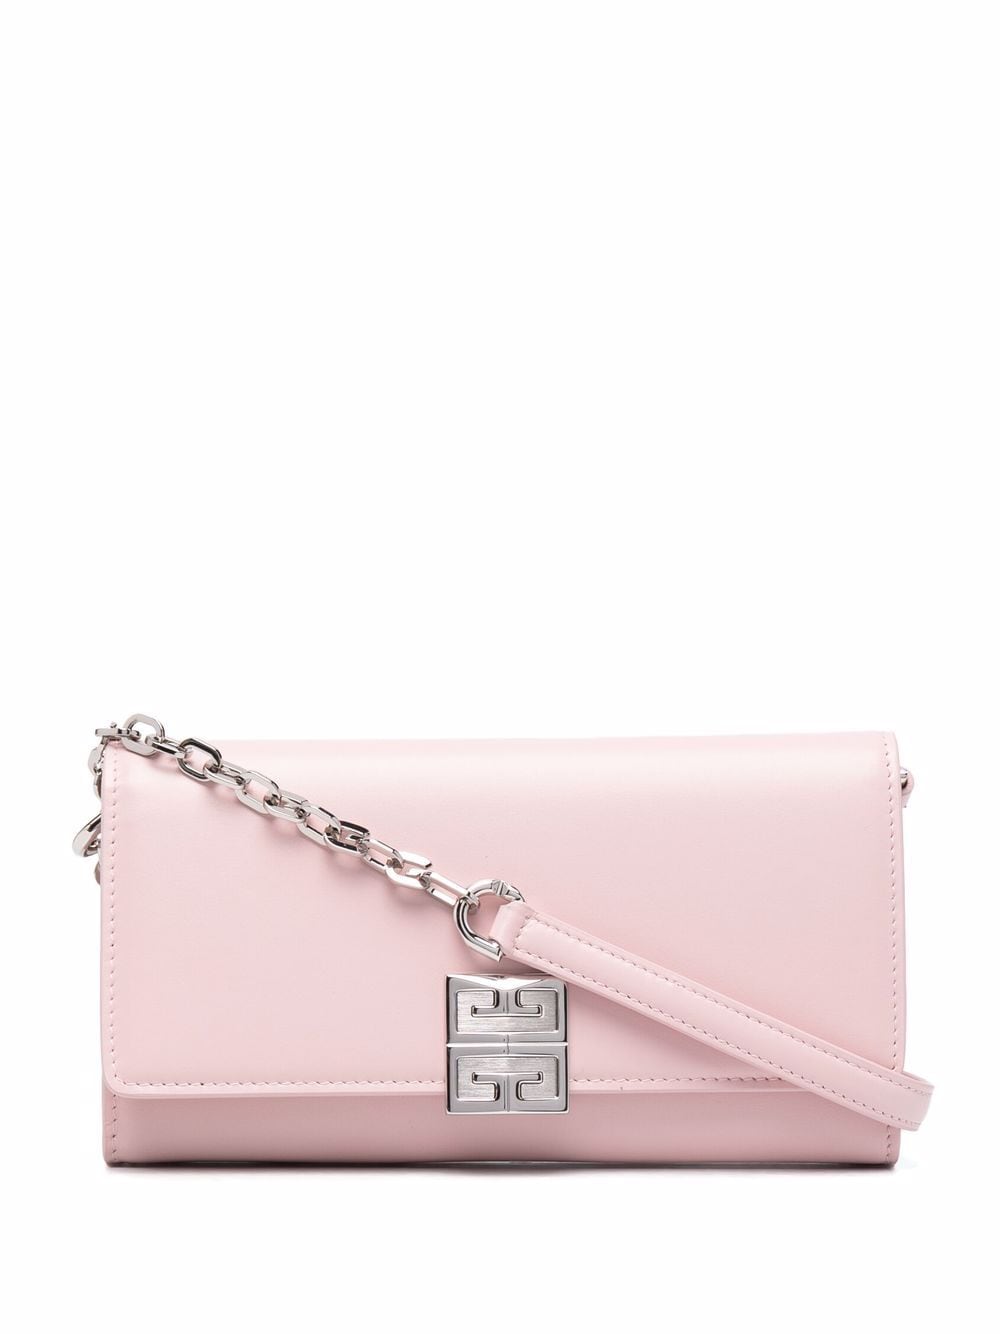 Box leather 4G wallet with chain, pink colour